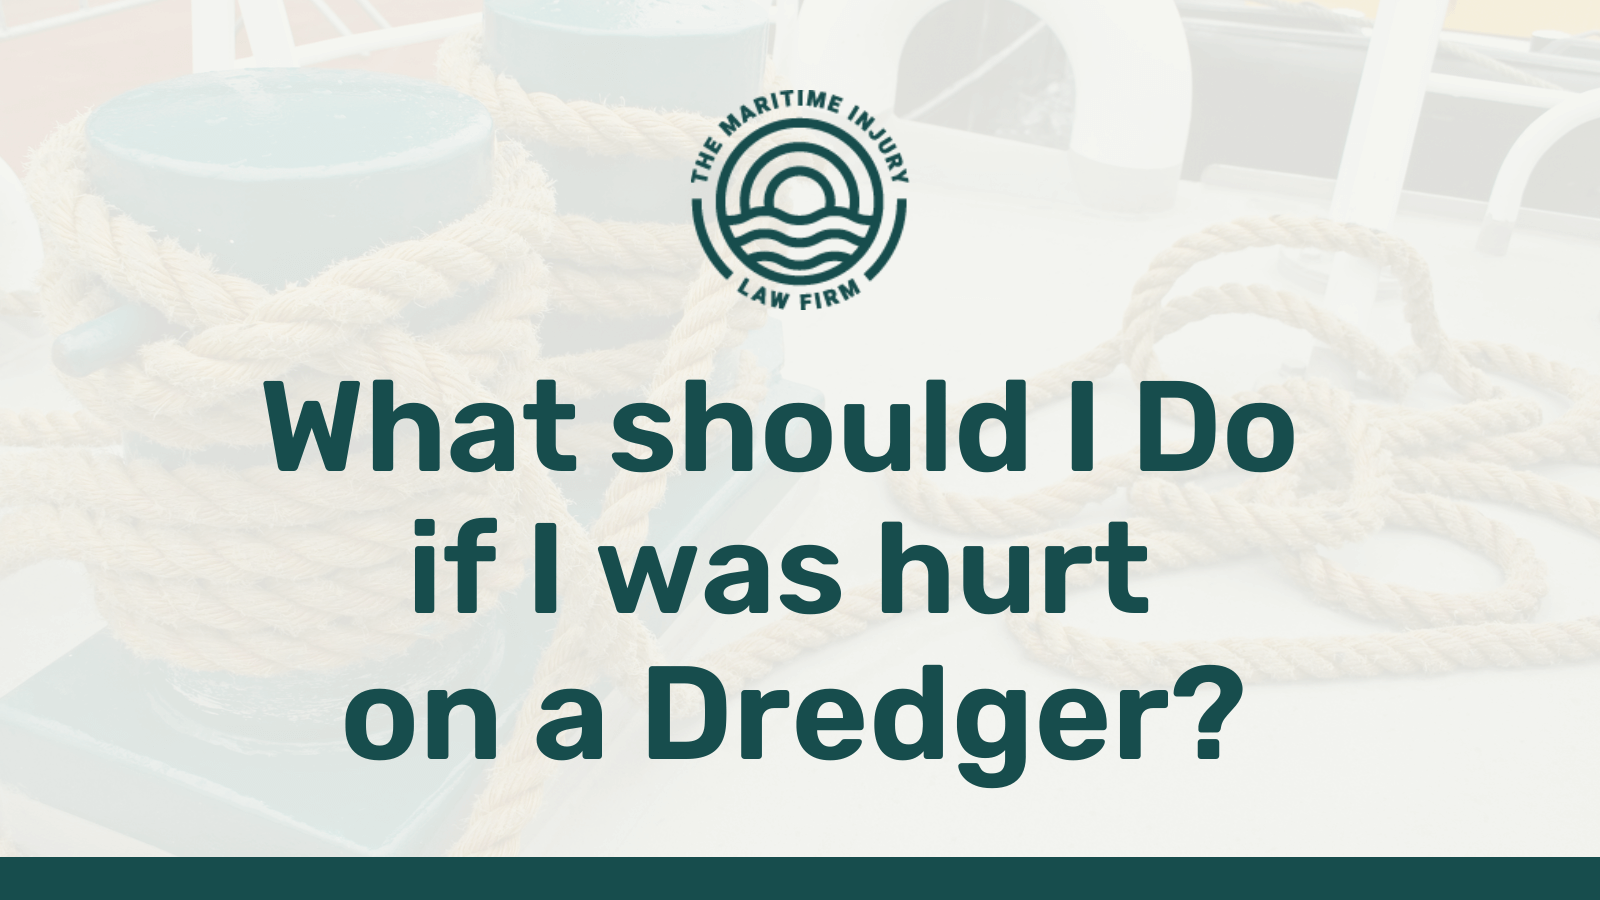 What Should I Do If I Was Hurt on a Dredger - maritime injury law firm - George Vourvoulias